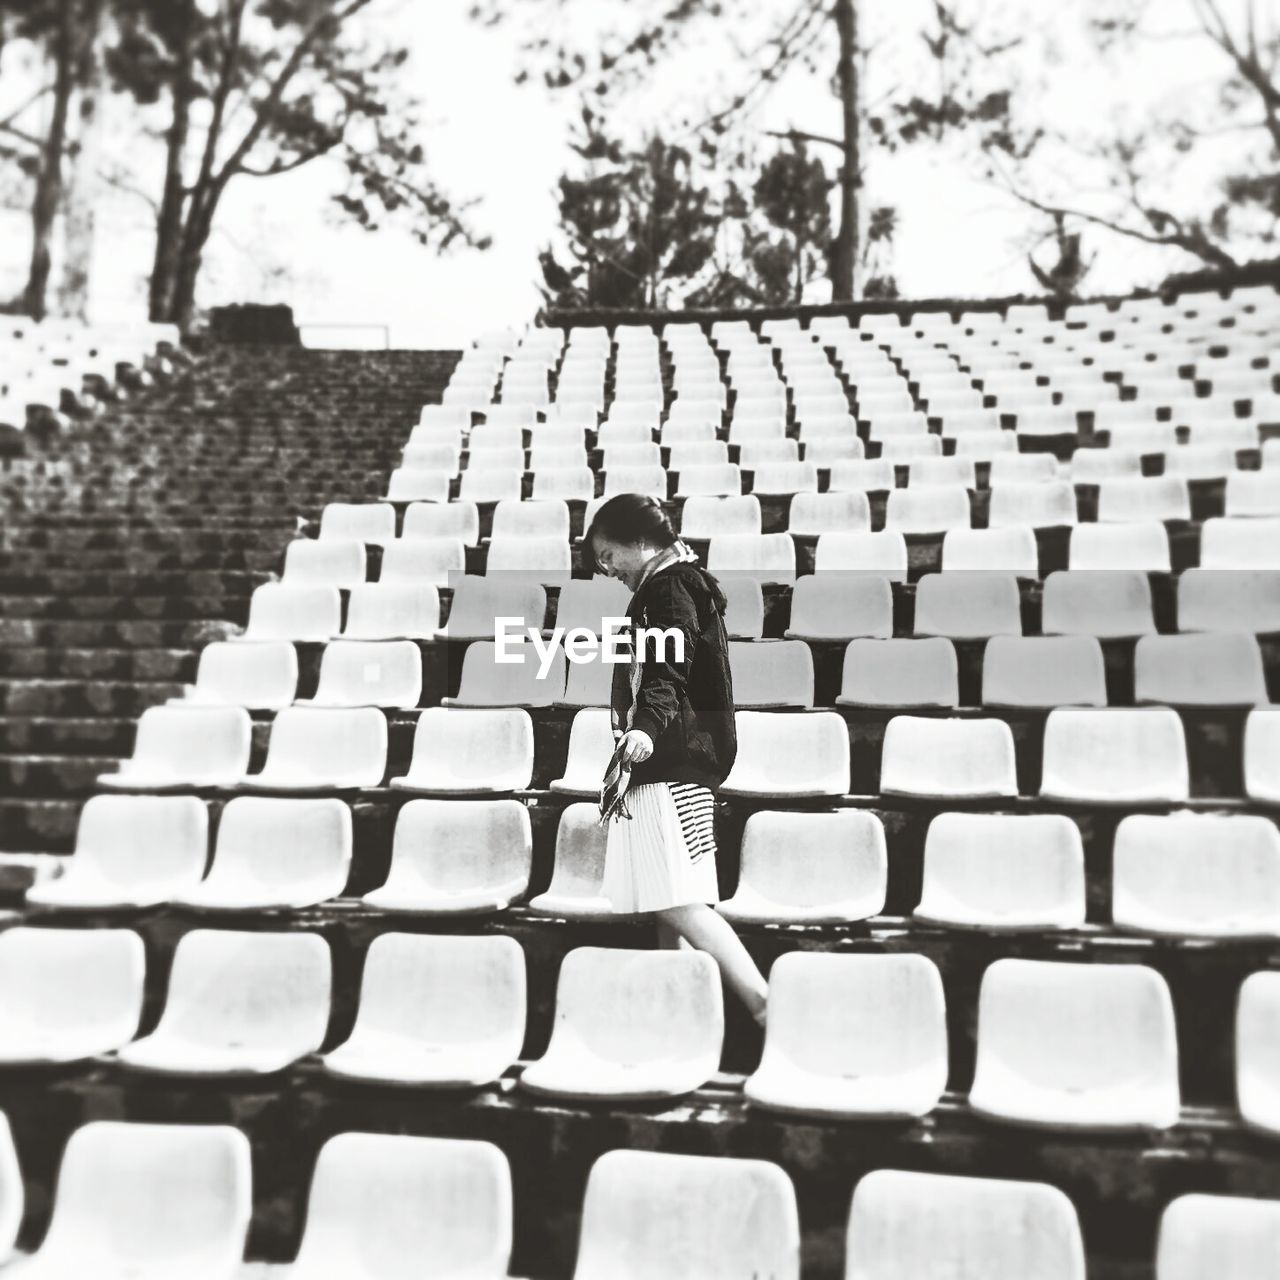 Woman walking amidst chairs against trees